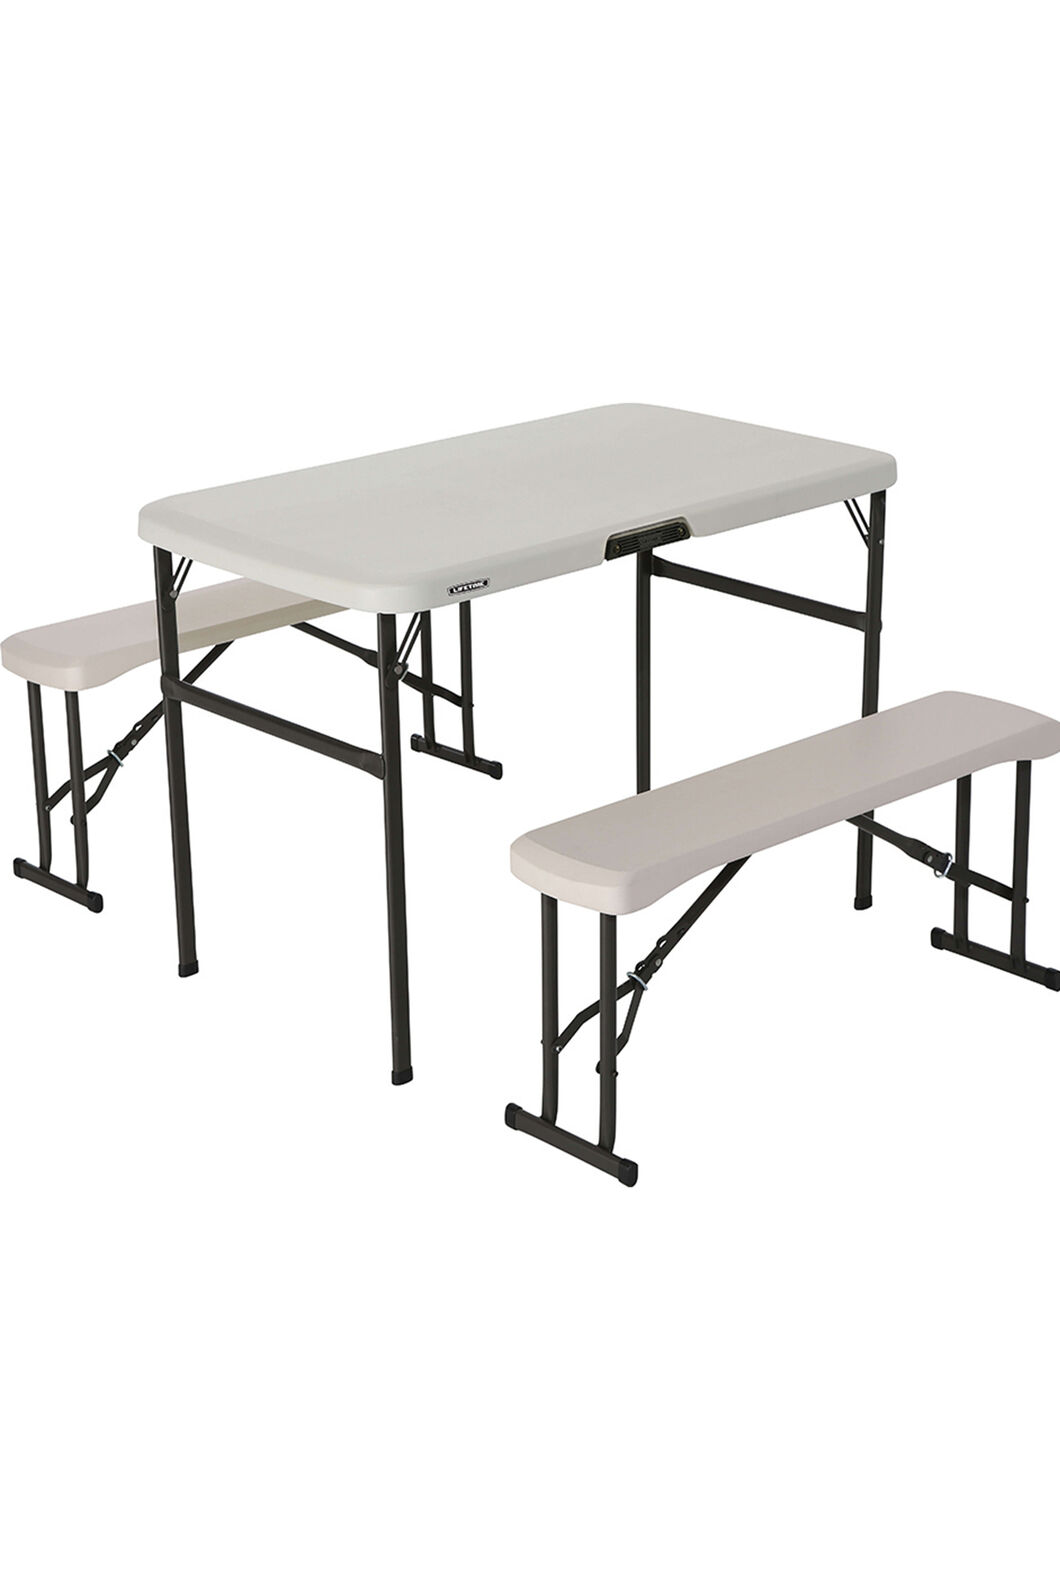 Lifetime Folding Picnic Table And Bench, Folding Camping Table And Chairs Set Bunnings